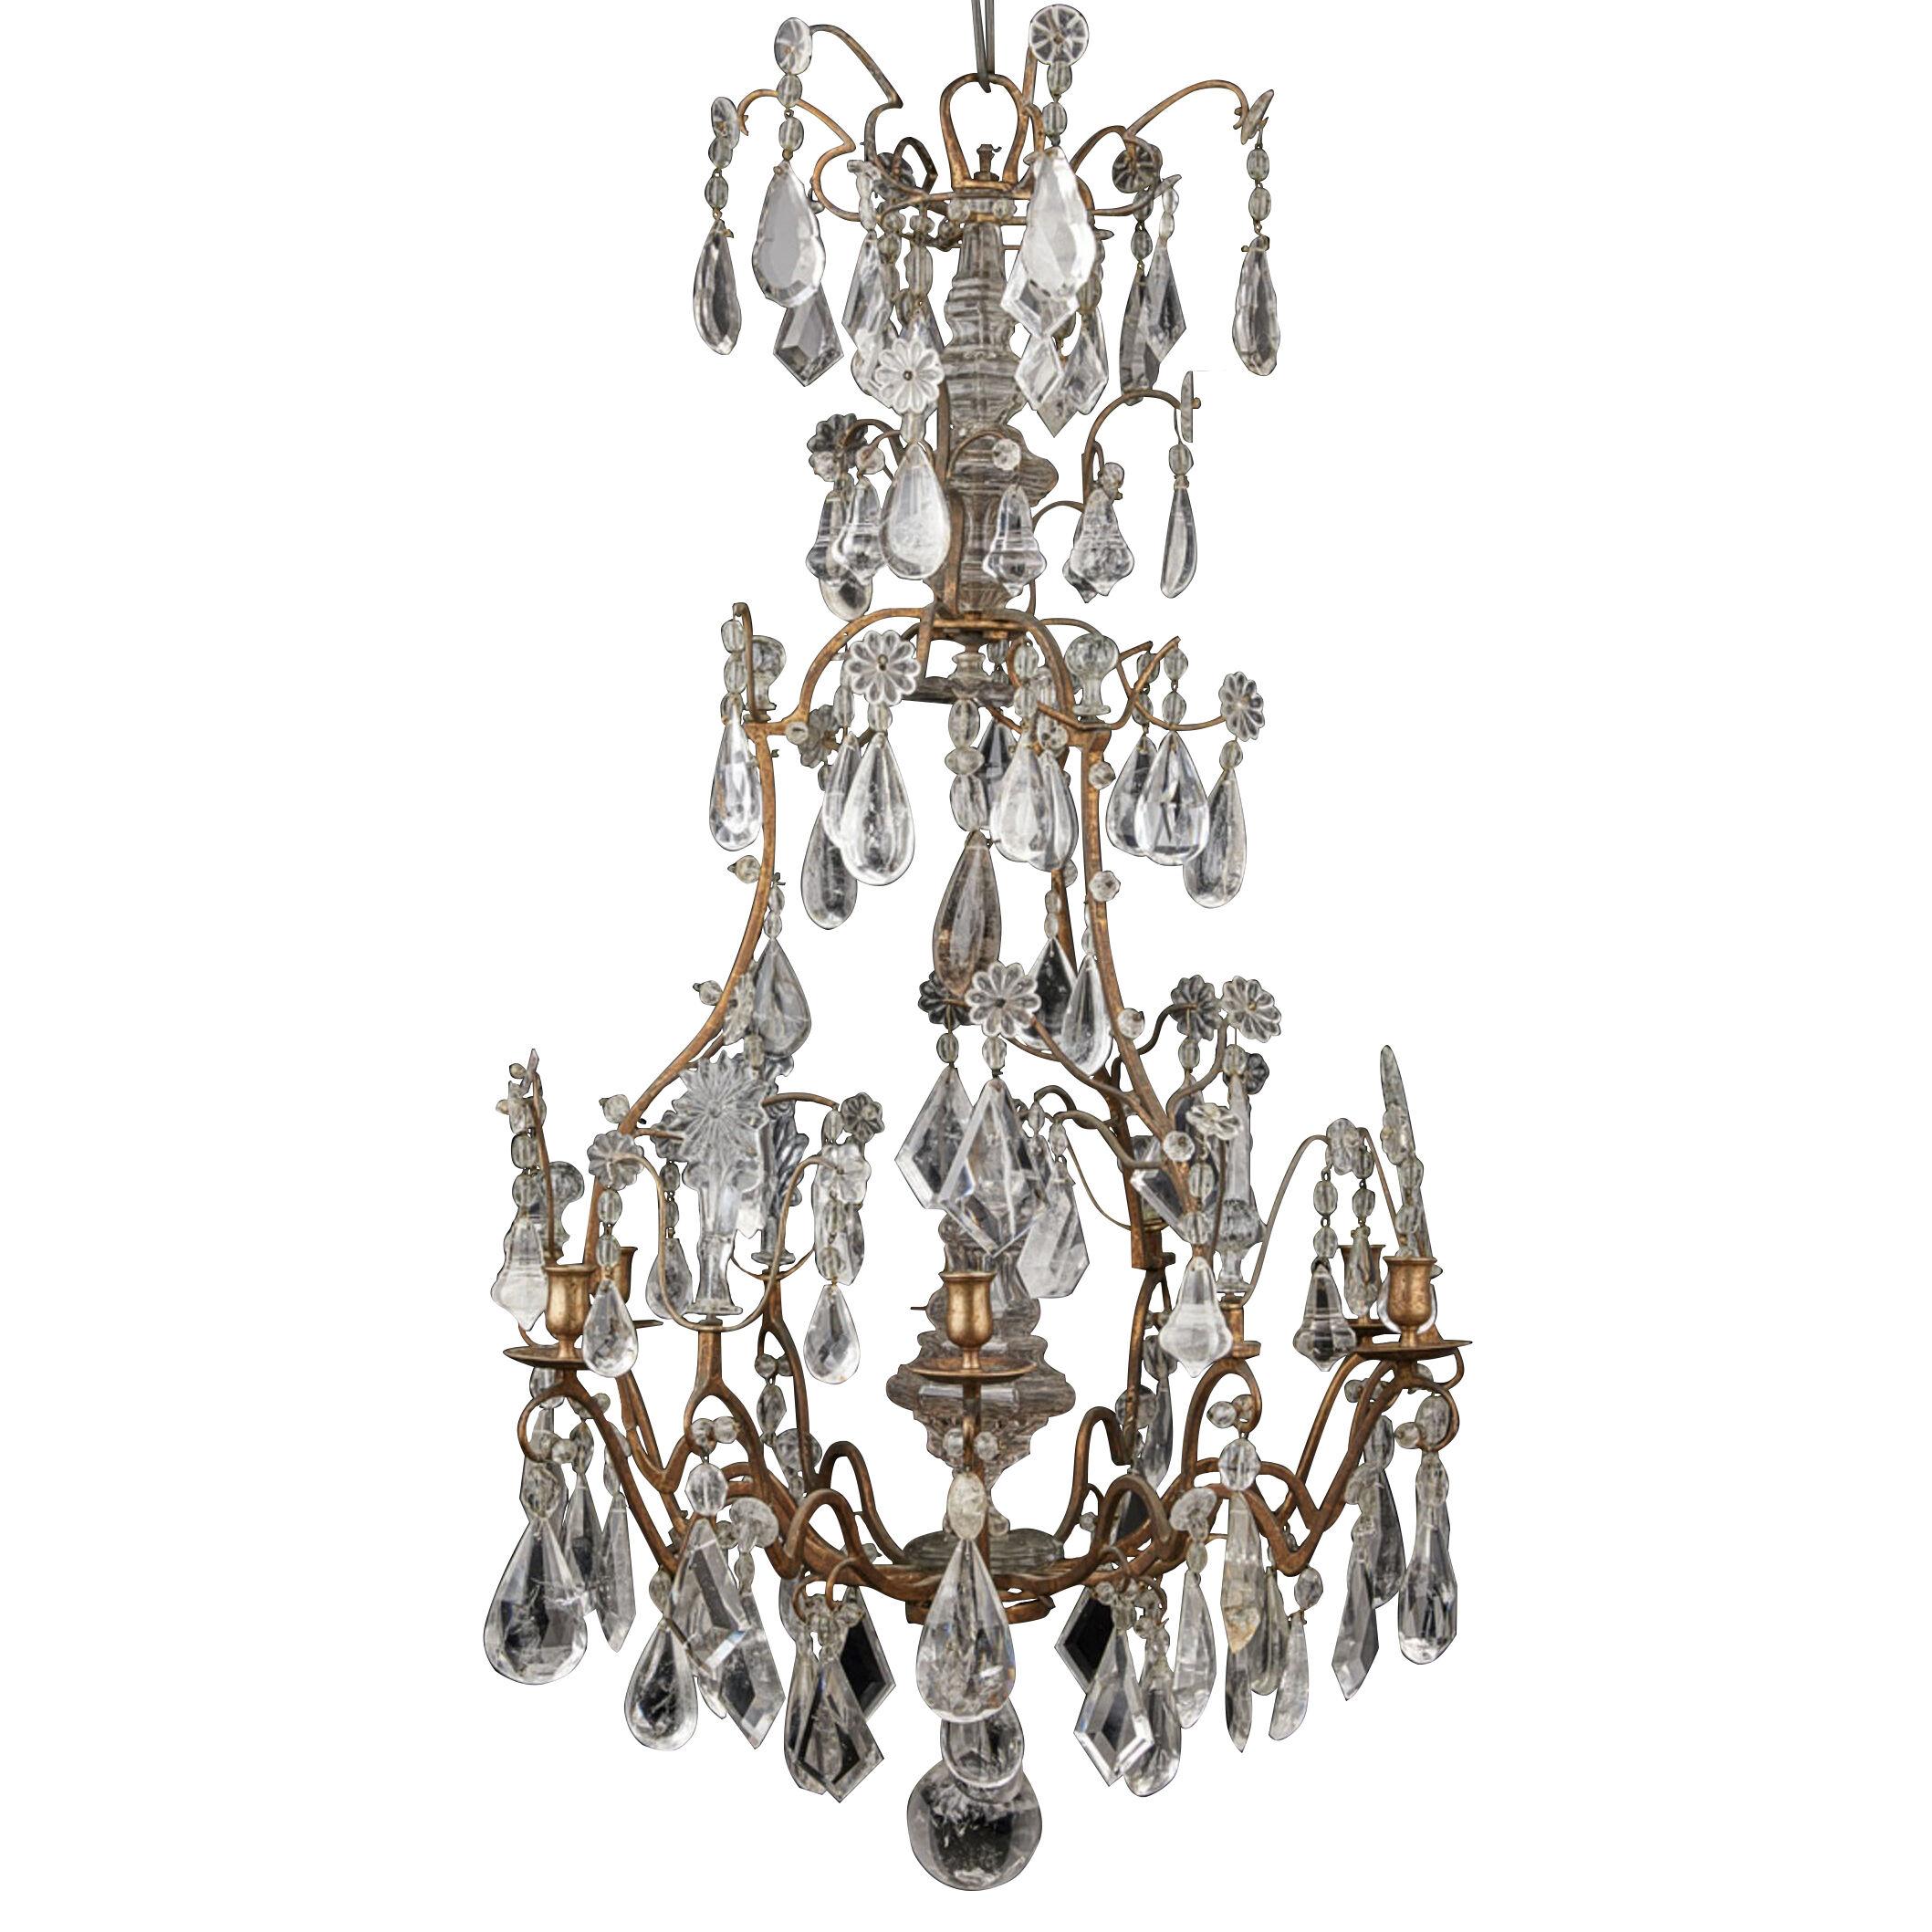 French rock crystal chandelier, 18th c